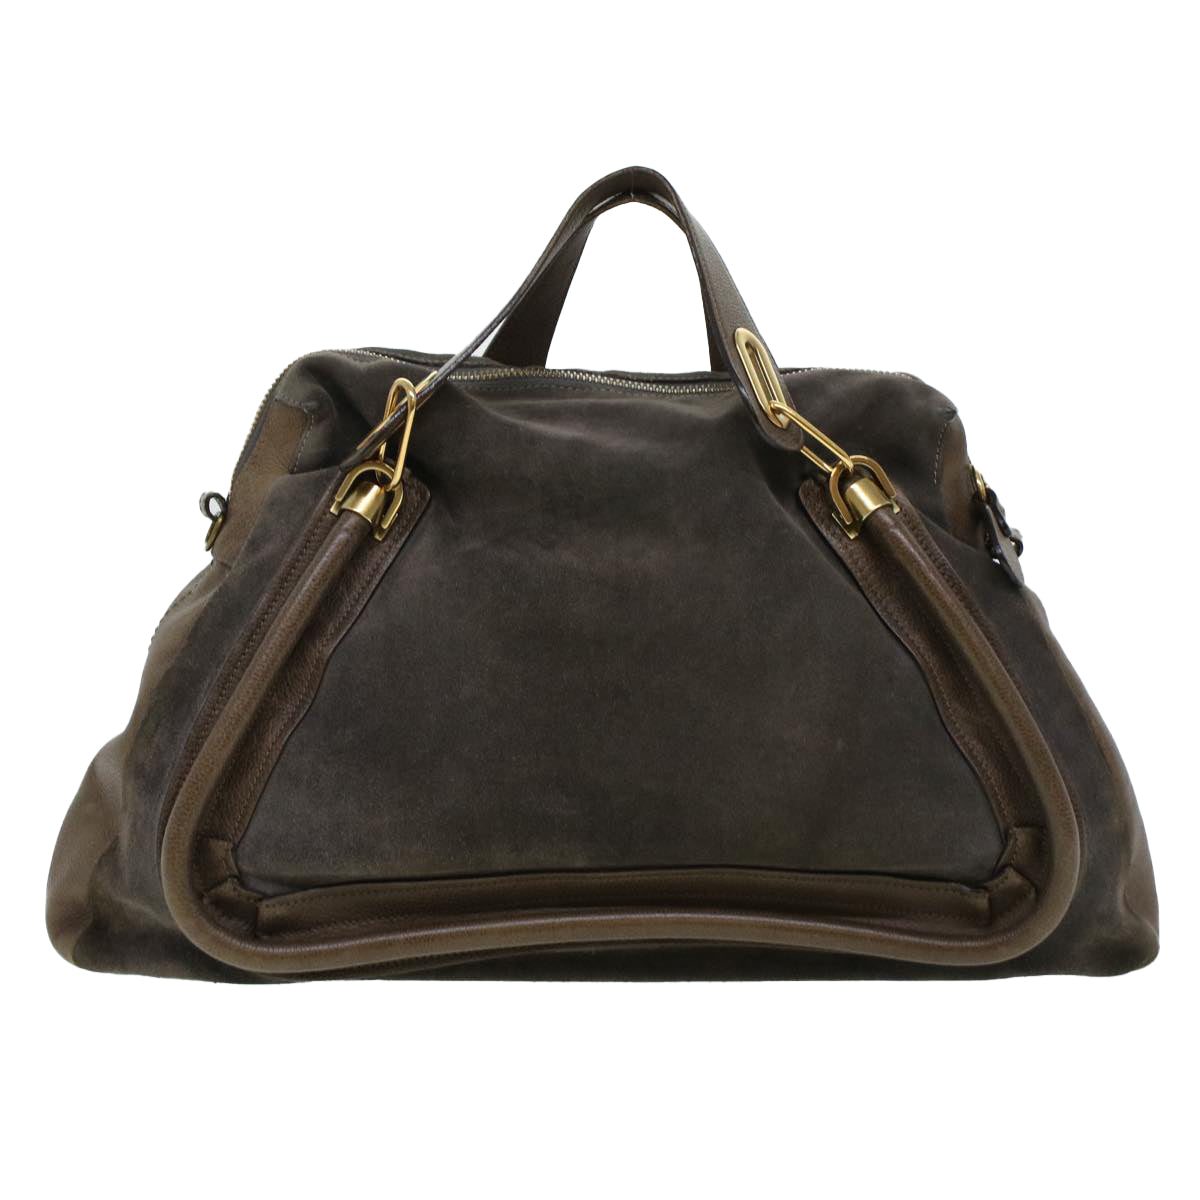 Chloe Paraty Hand Bag Leather Brown Auth 44038 - 0